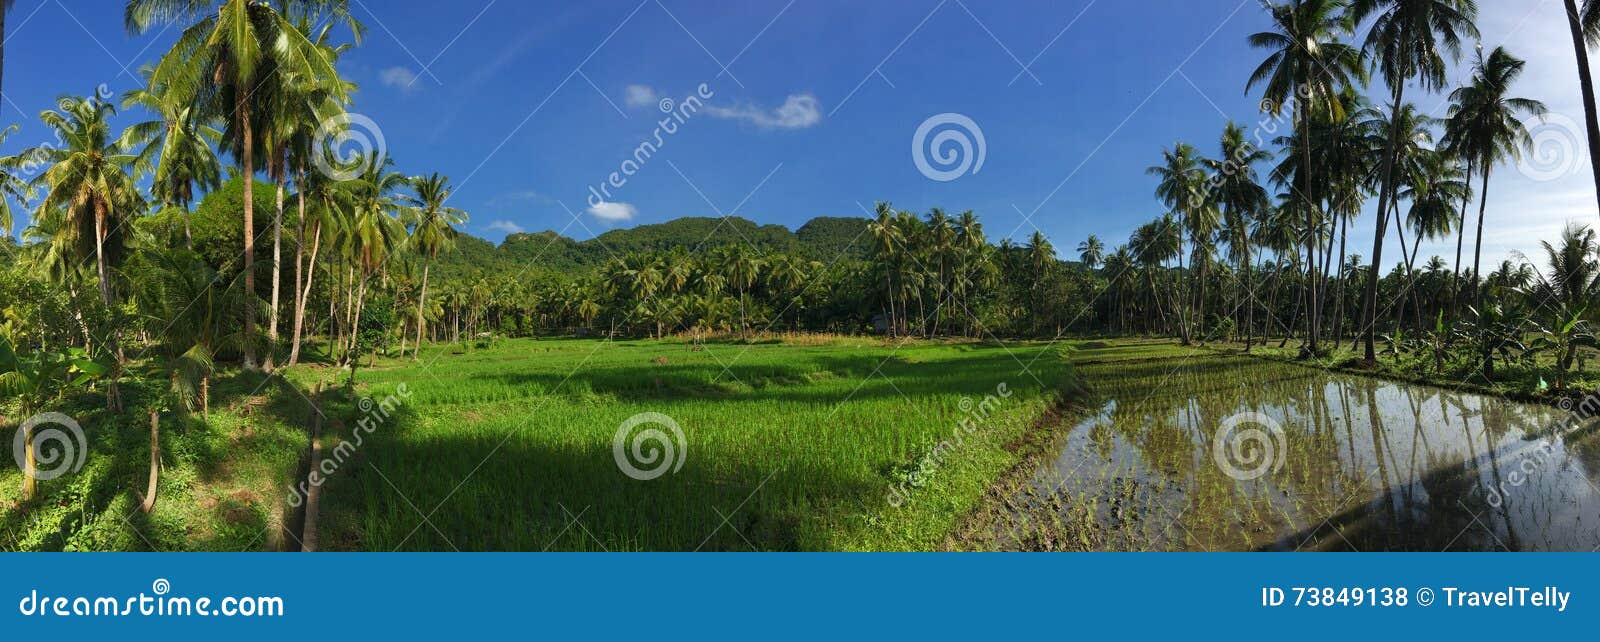 rice field with palmtrees reflection panorama